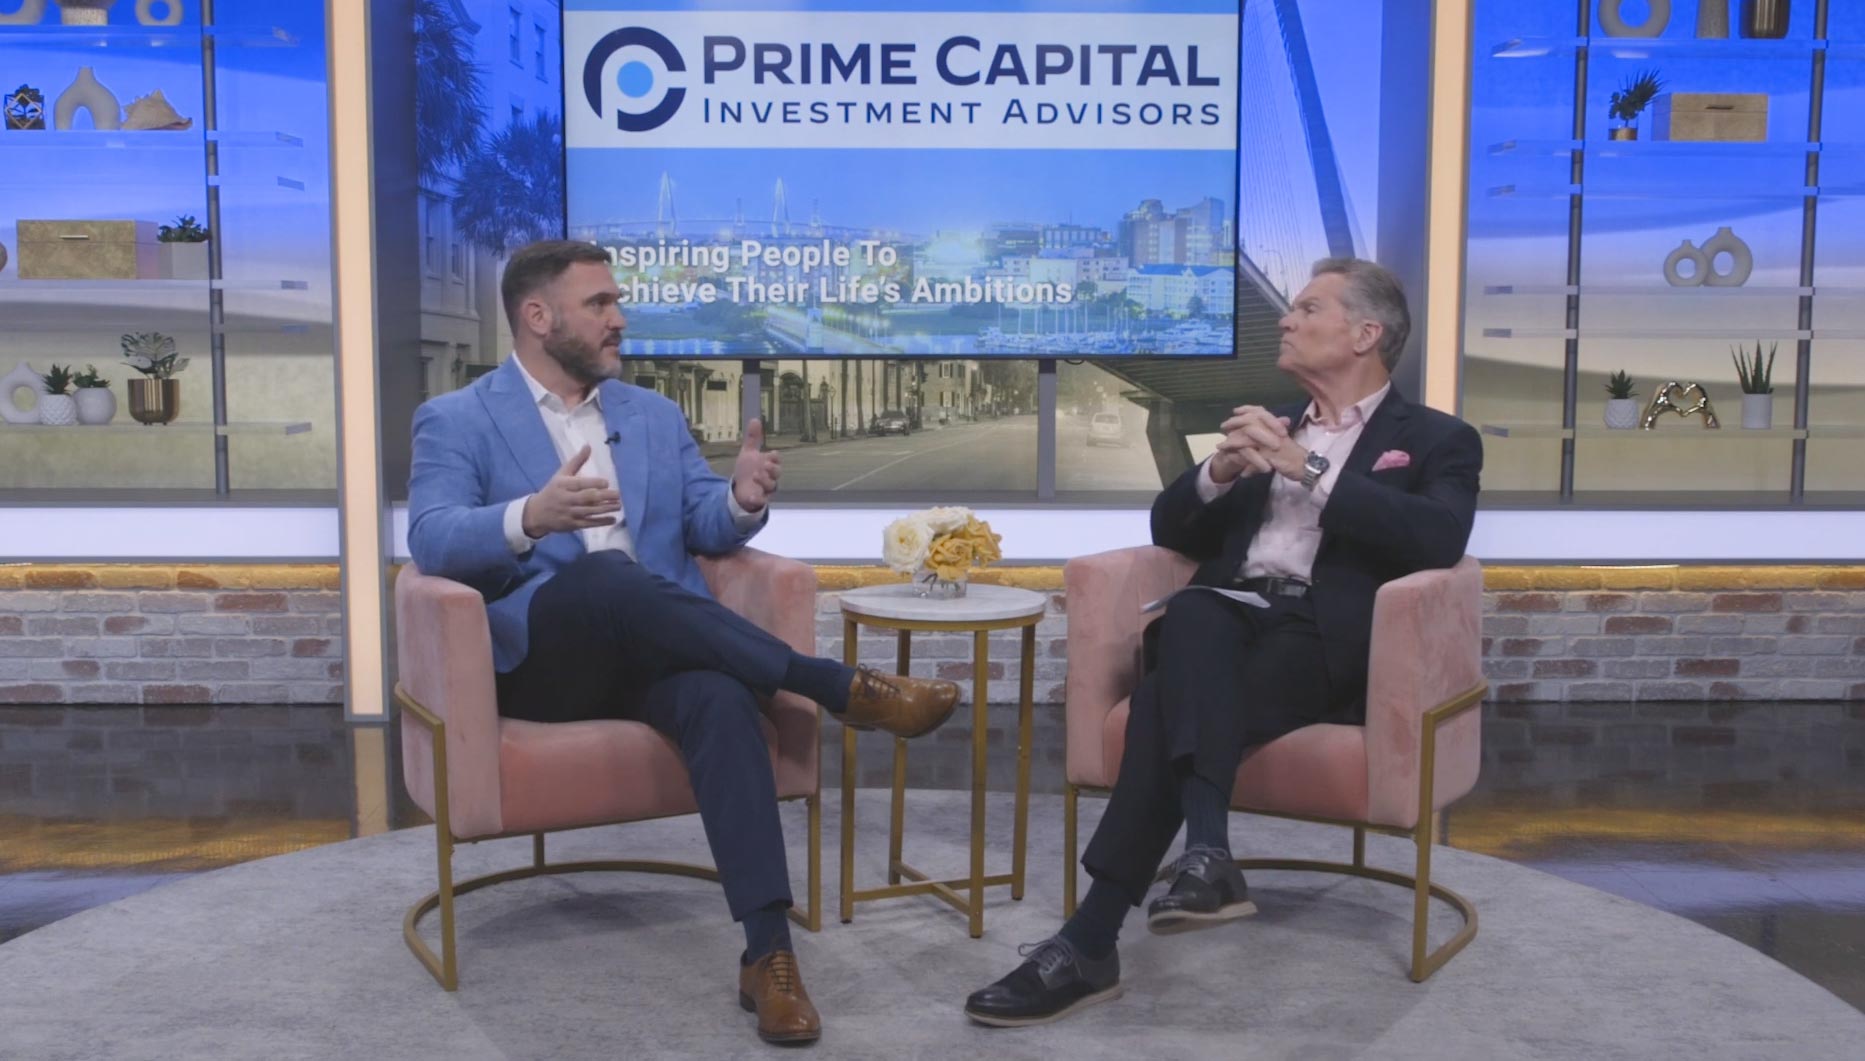 Jason Noble Discusses Portfolio Payday™ On ABC’s “Lowcountry Live” Show